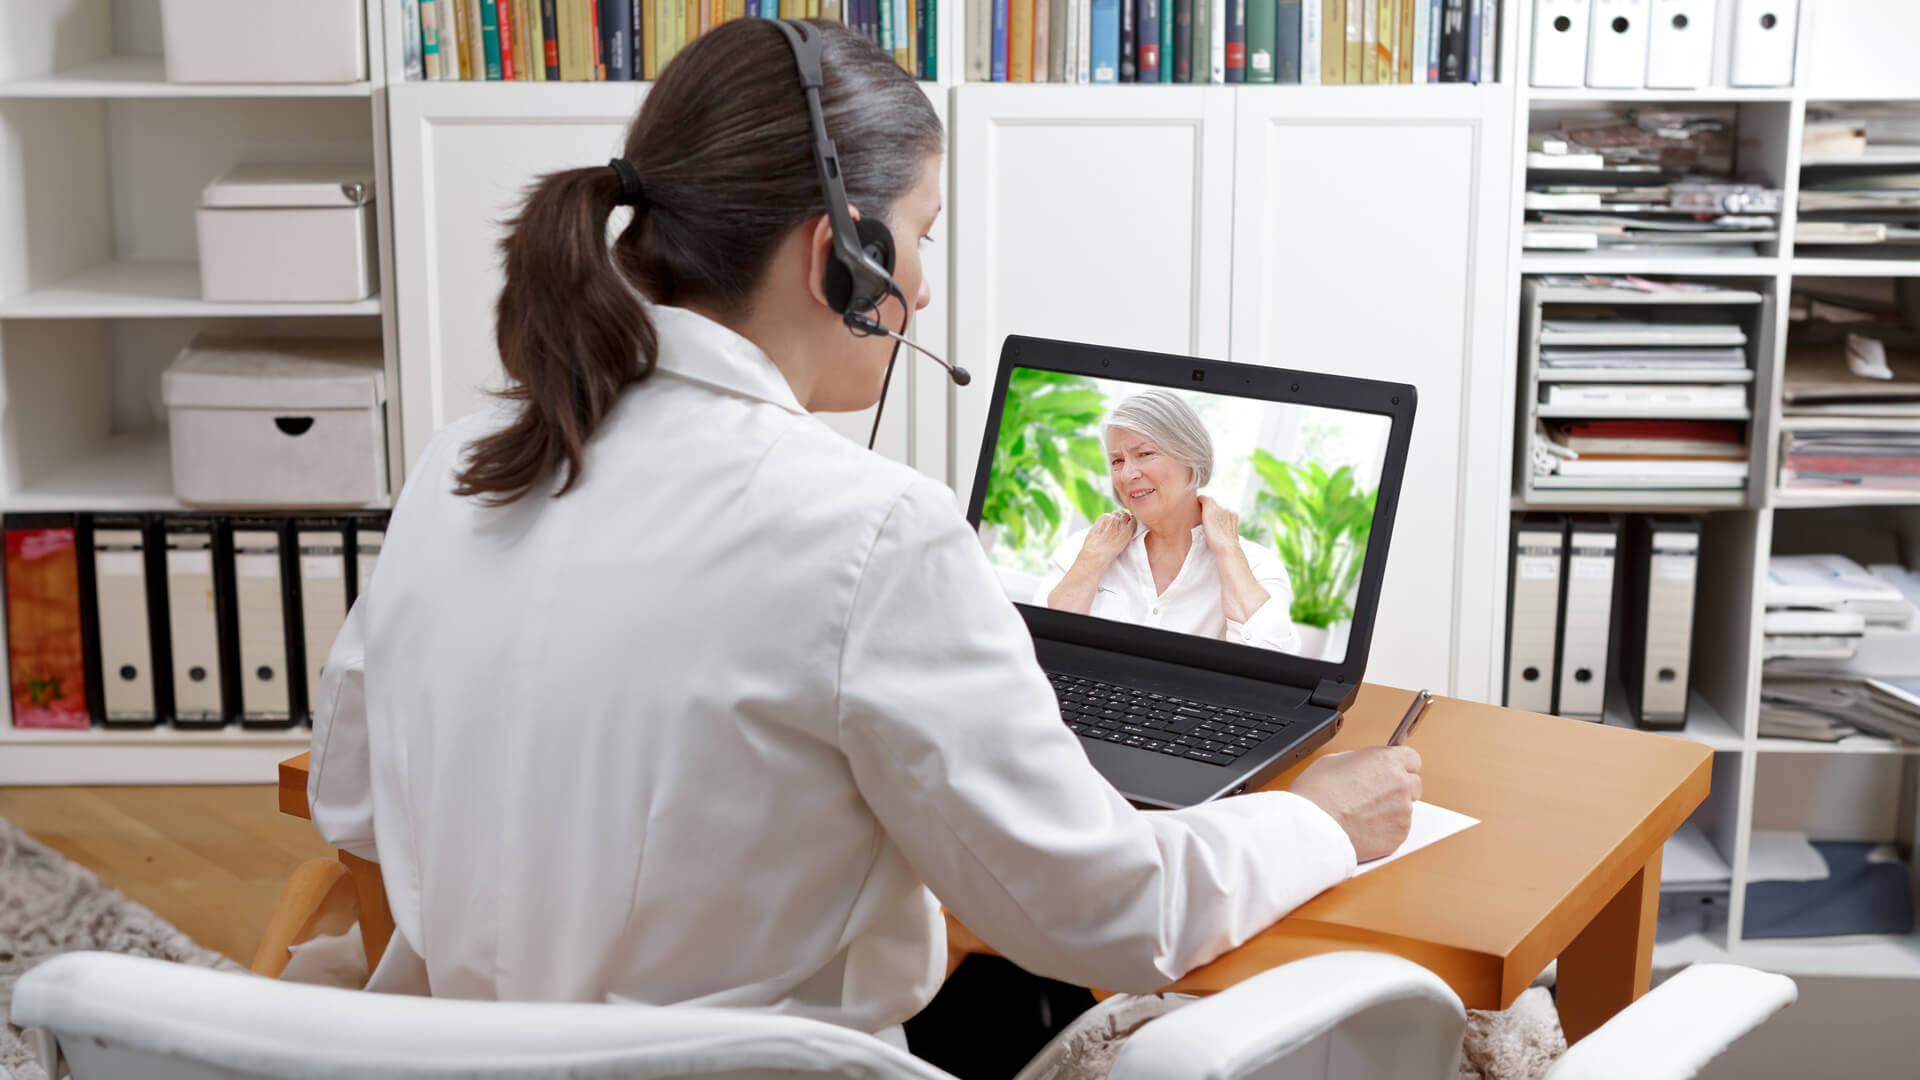 a doctor is talking to a patient on a video call using her laptop